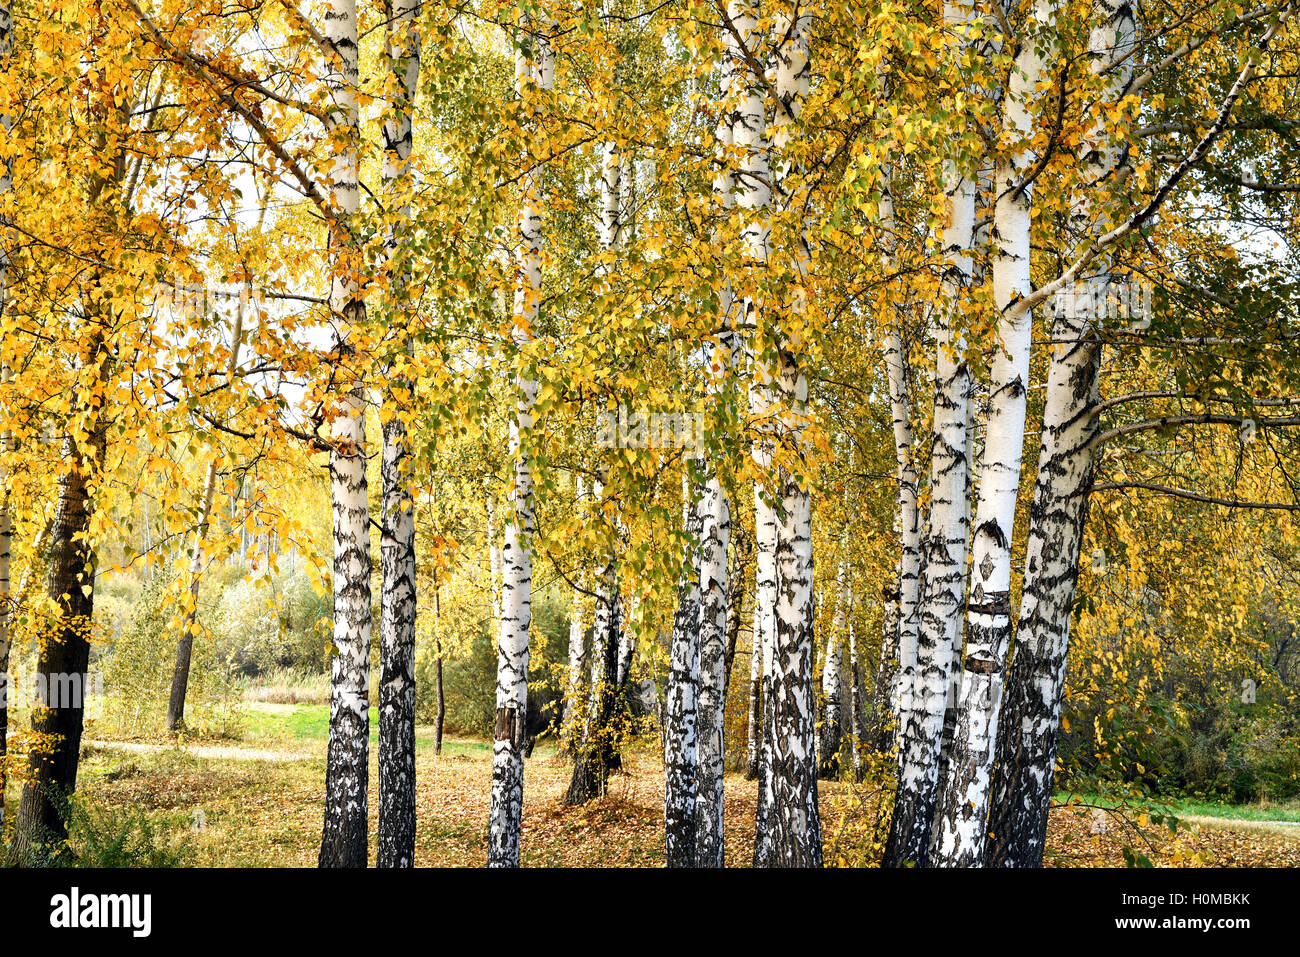 Birch grove with yellow leaves in cloudy day Stock Photo